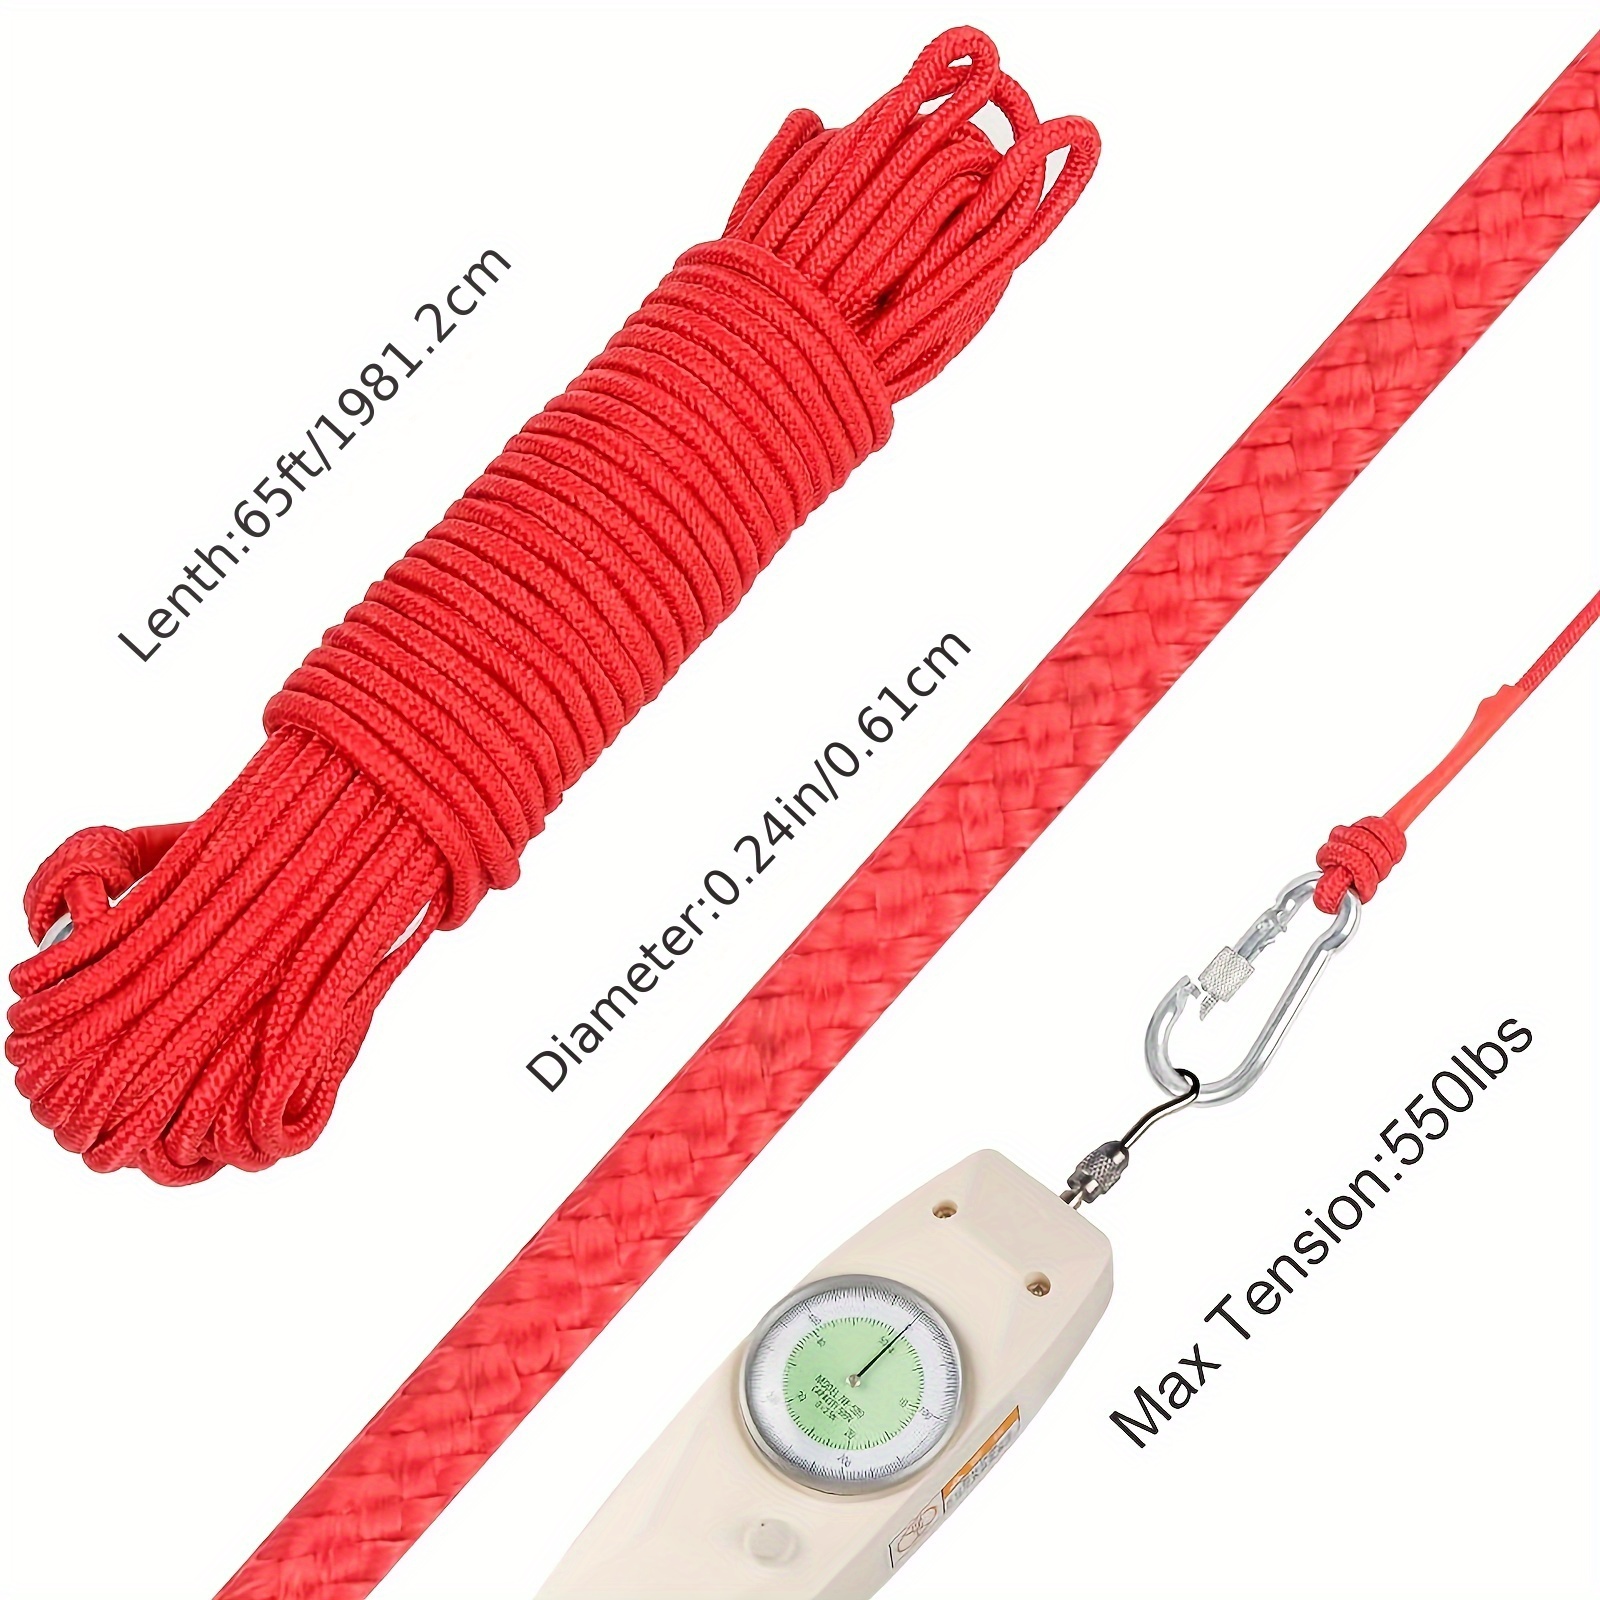 Brrnoo 20M Magnet Fishing Nylon Rope, High Strength Cord Safety Braid Rope  Fishing Strong Pull Force Treasure Salvage Rope With Carabiner 